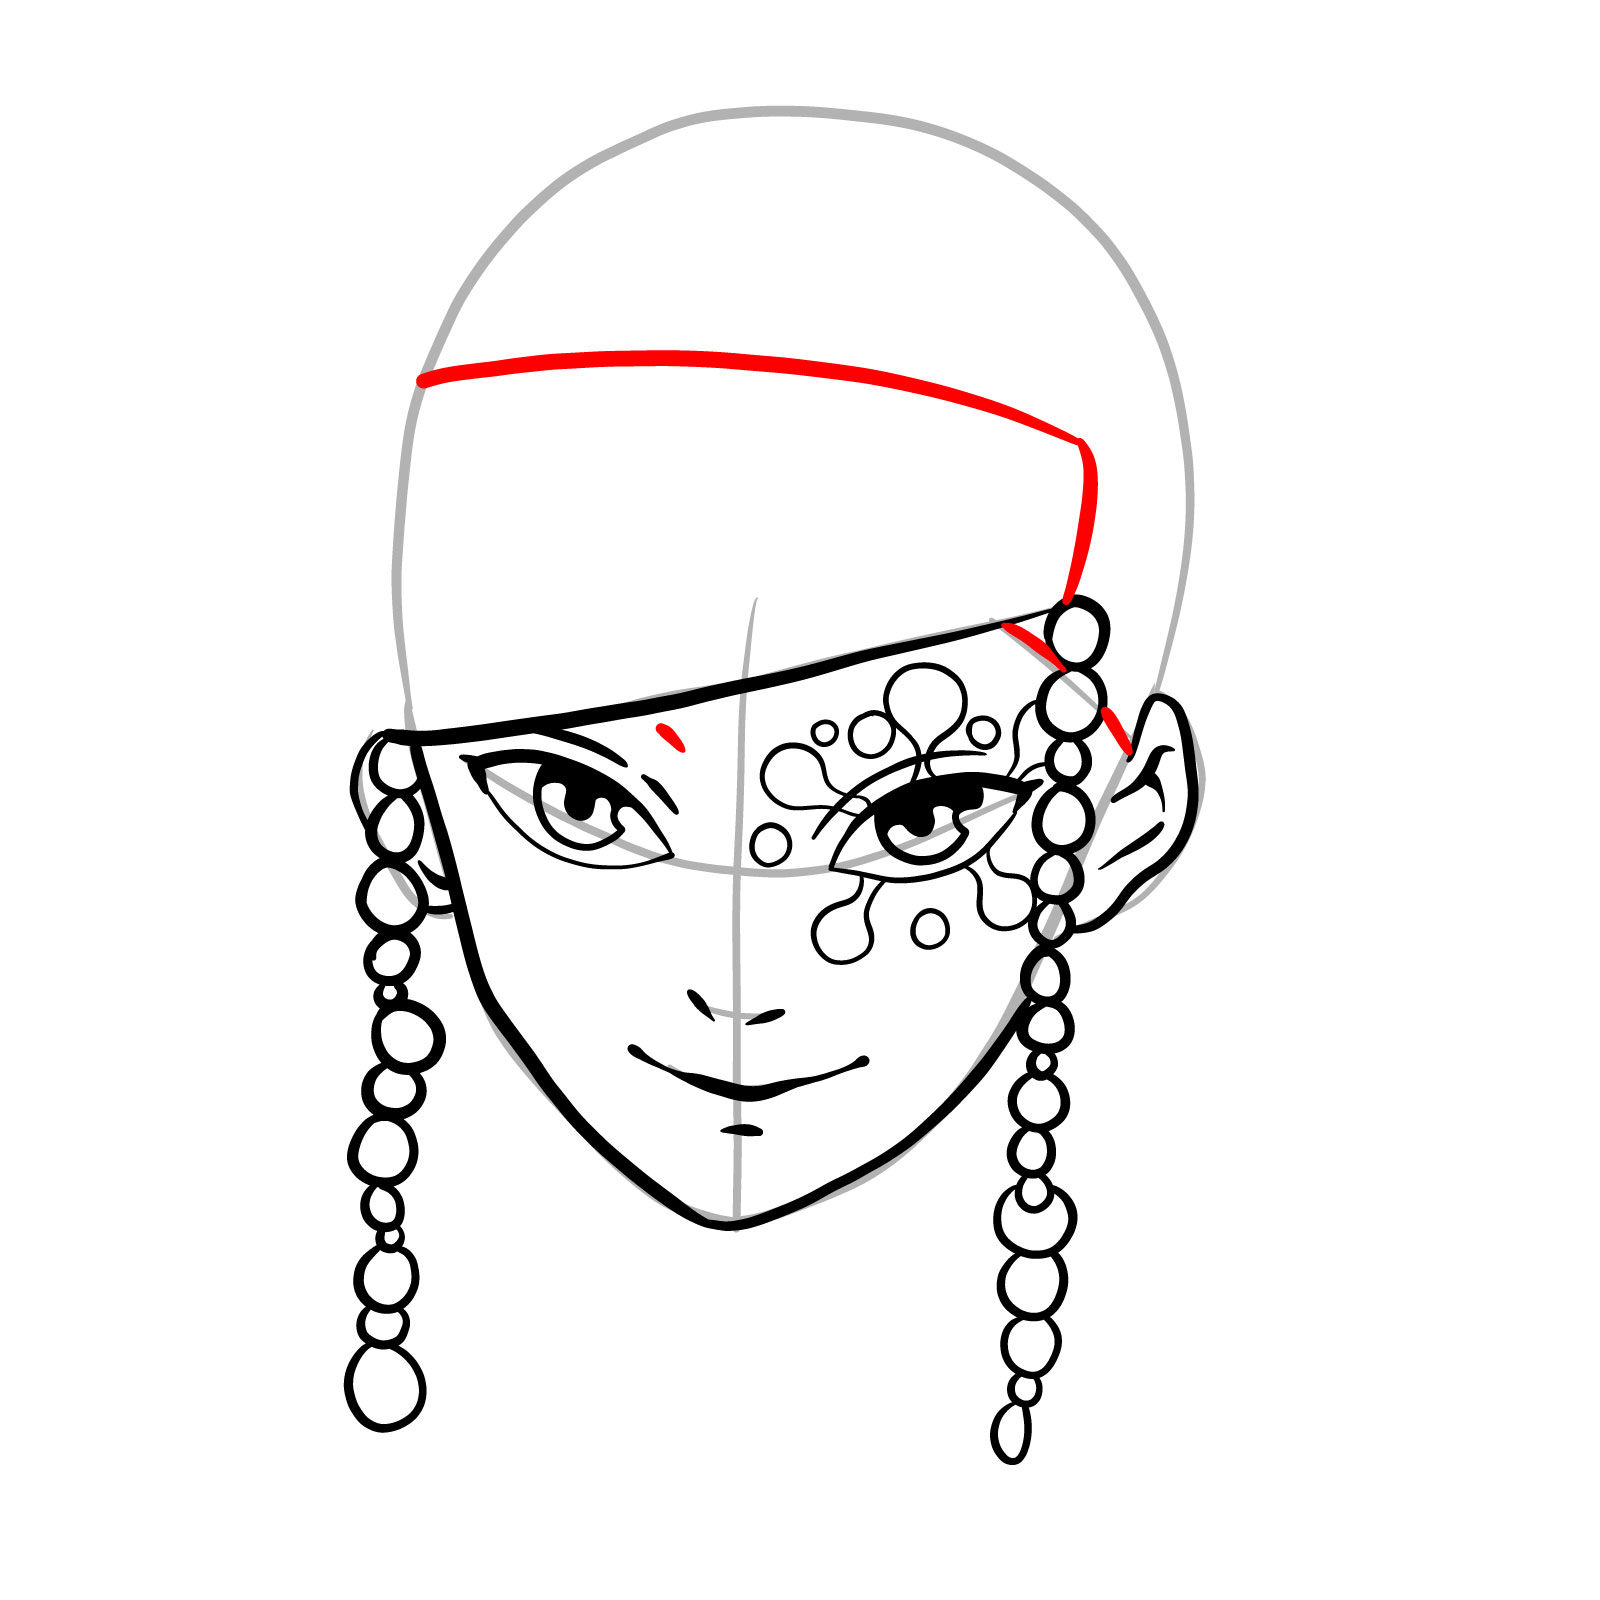 How to draw Lord Tengen's face - step 14